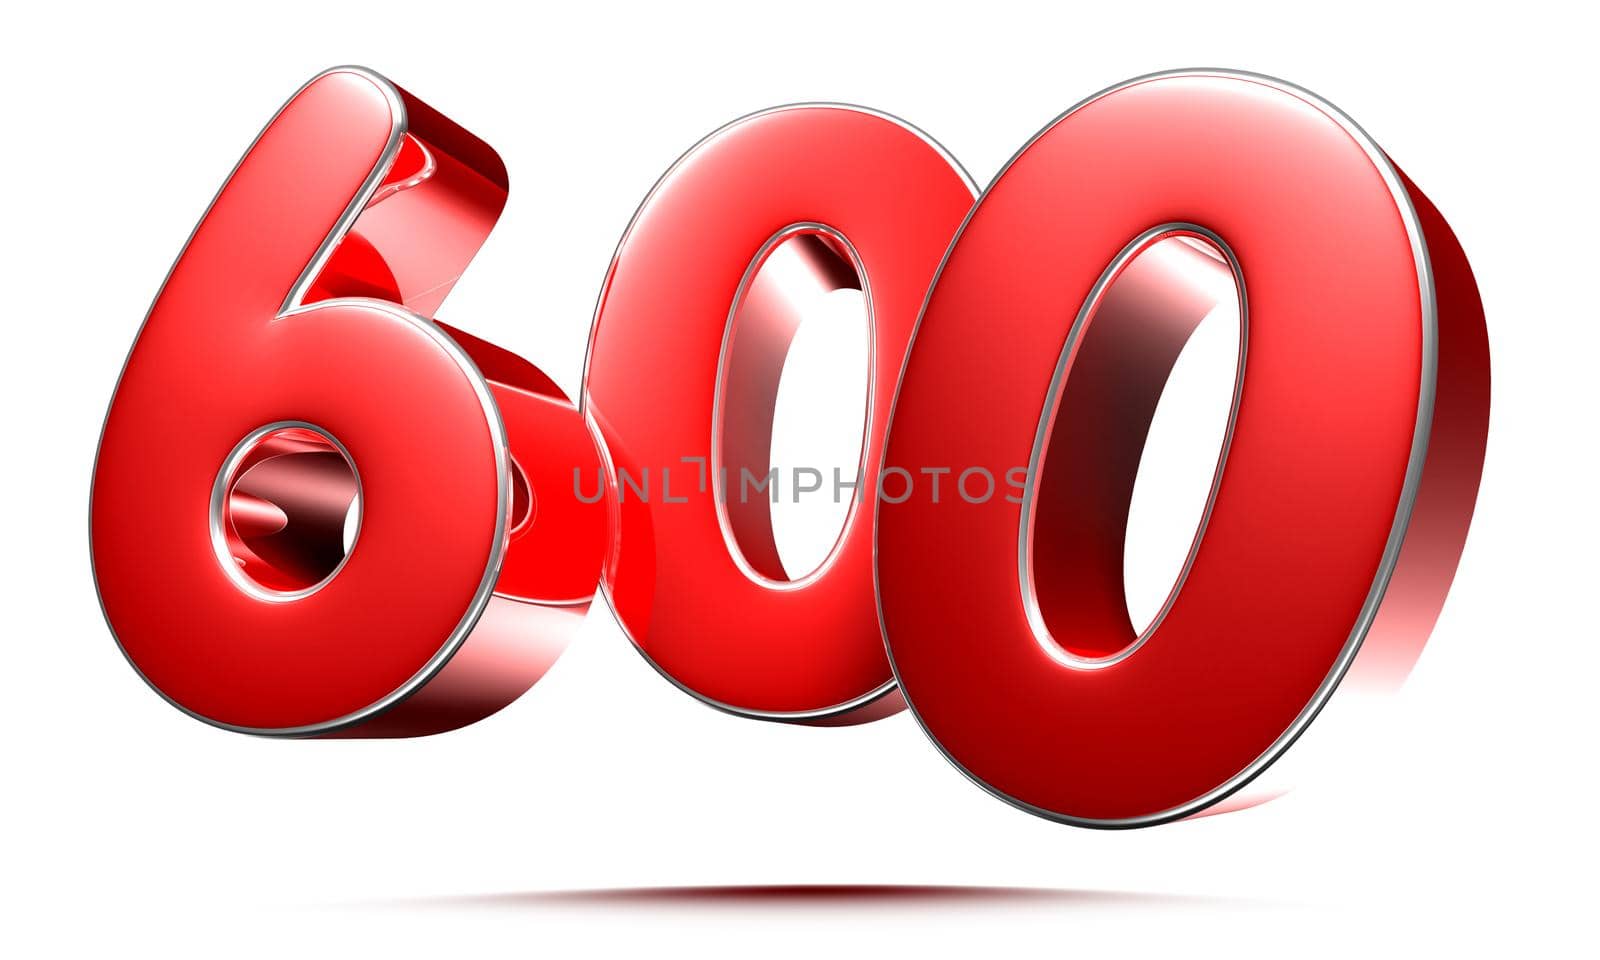 Rounded red numbers 600 on white background 3D illustration with clipping path by thitimontoyai